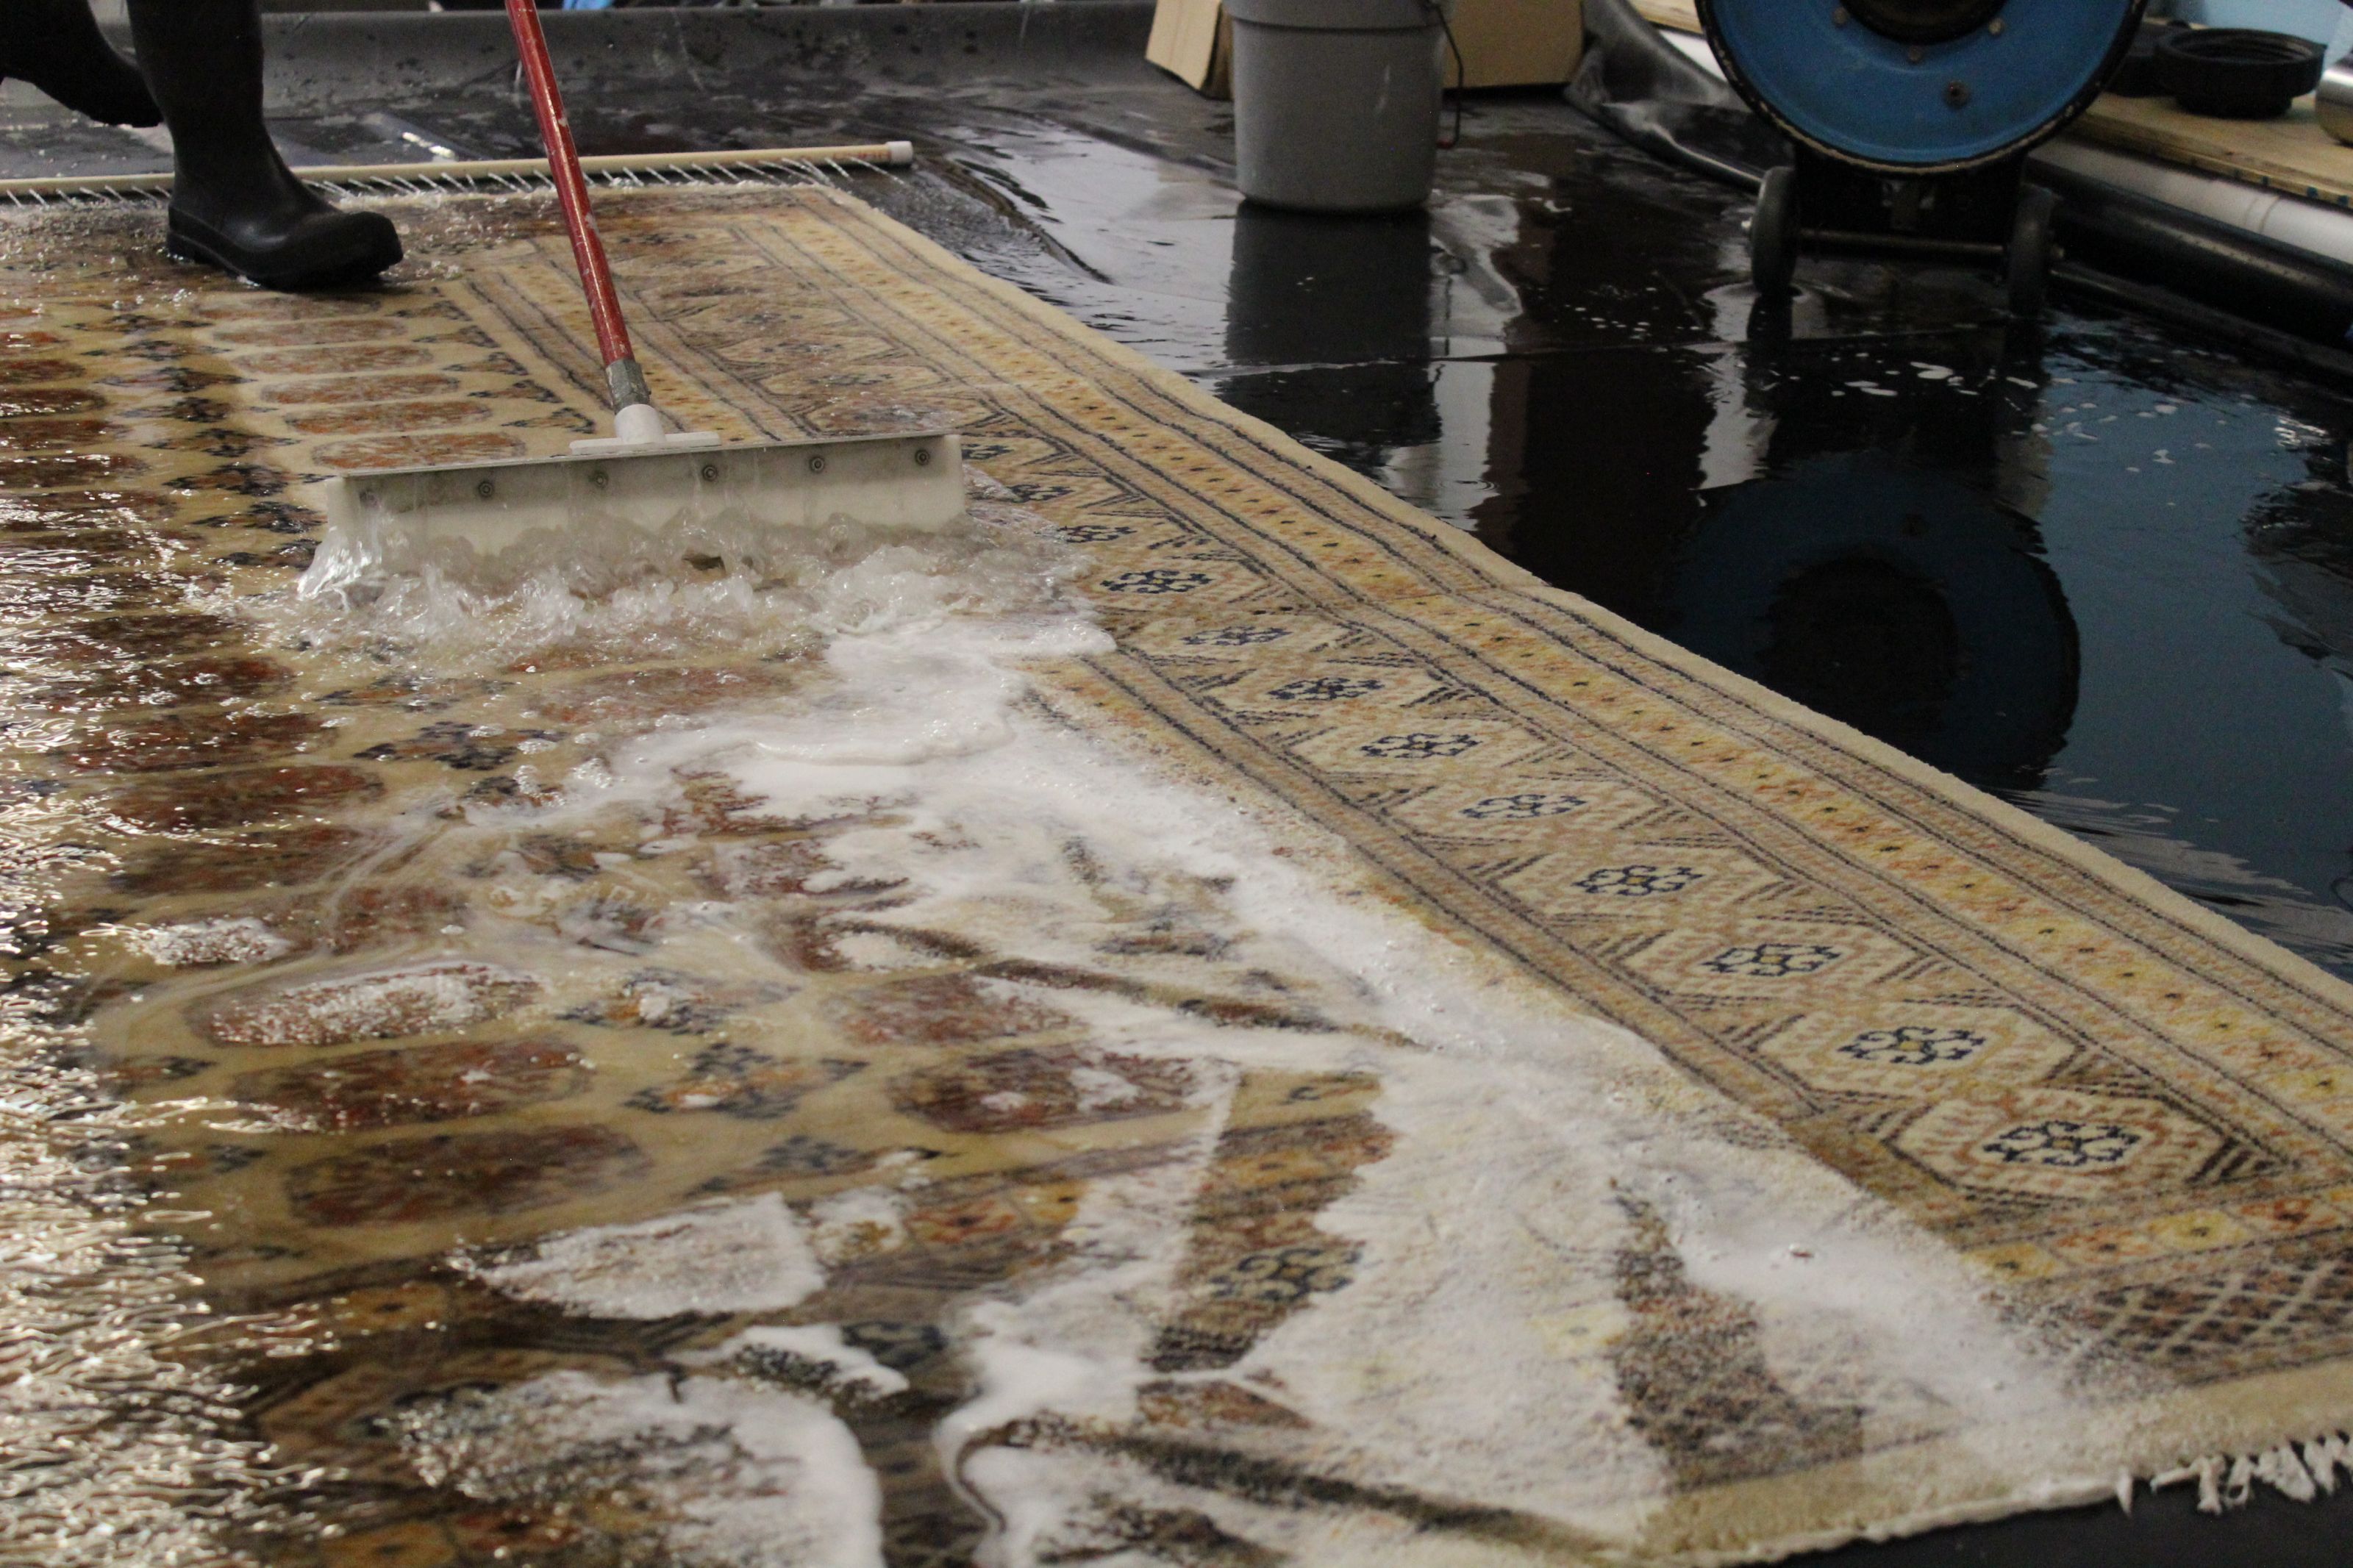 The Best Way To Clean Rugs. Prescott Valley Rug Cleaning